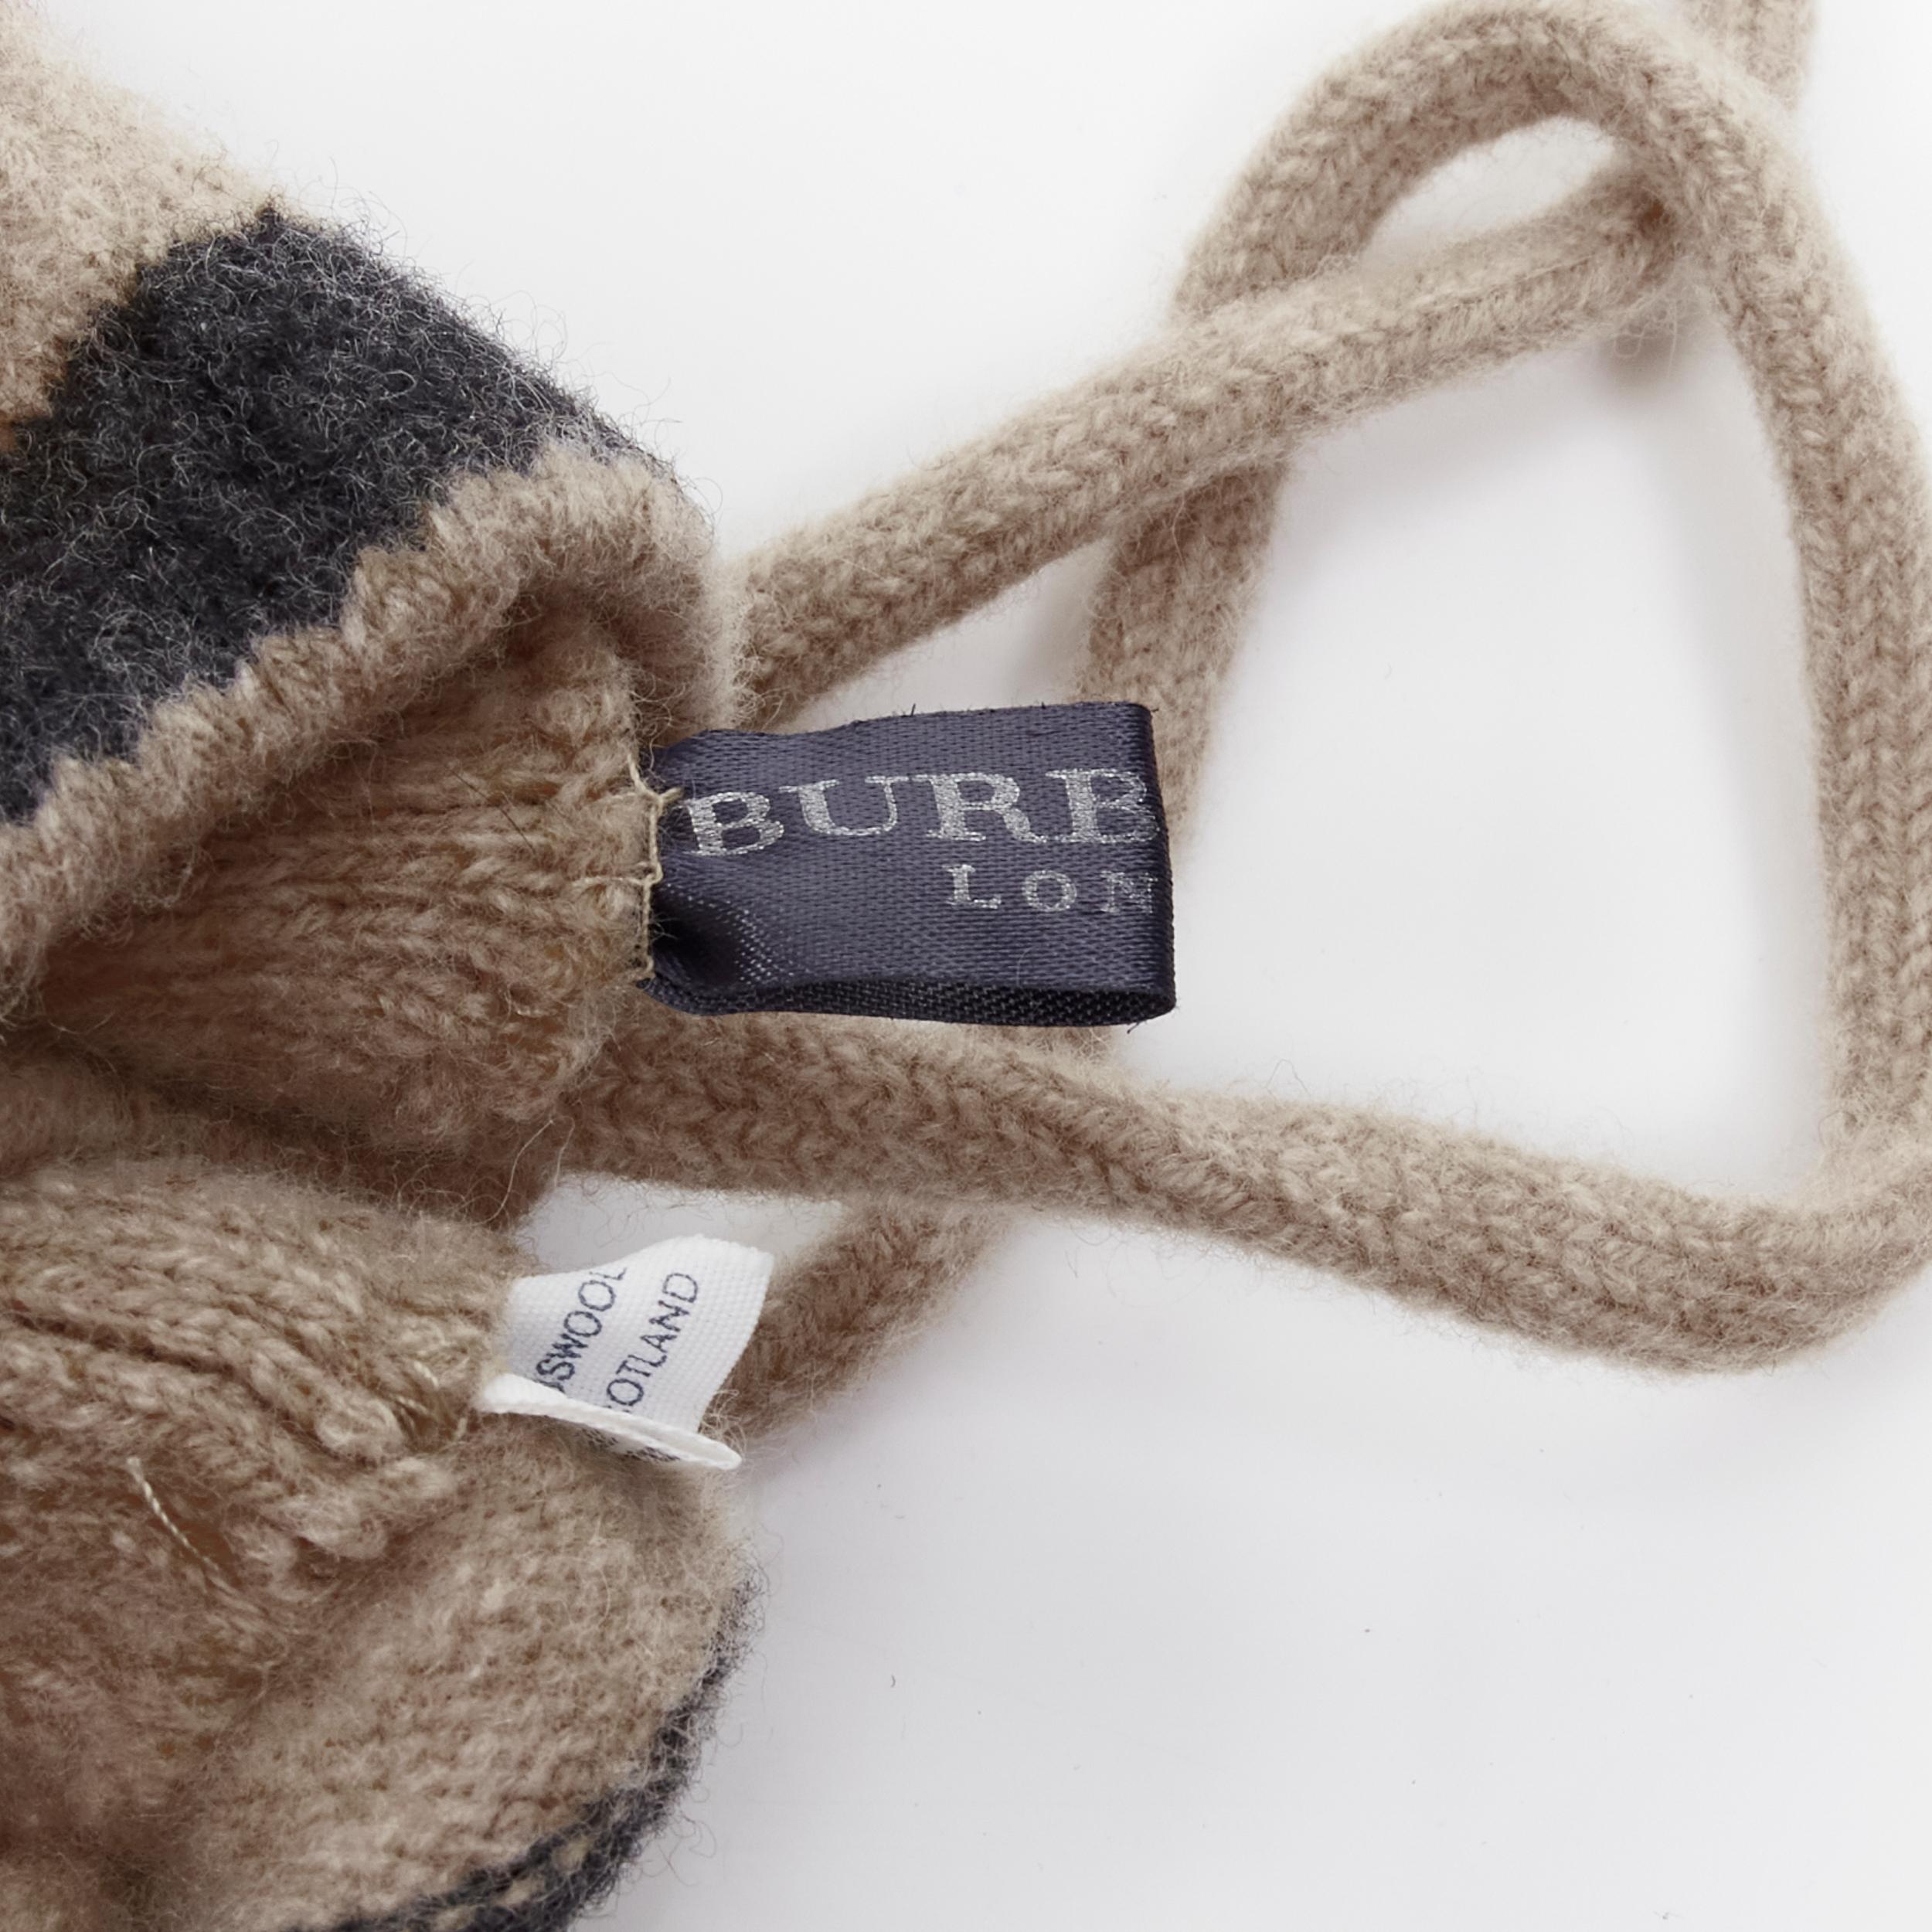 BURBERRY 100% lambs wool red black beige striped mitten glove on string For Sale 2